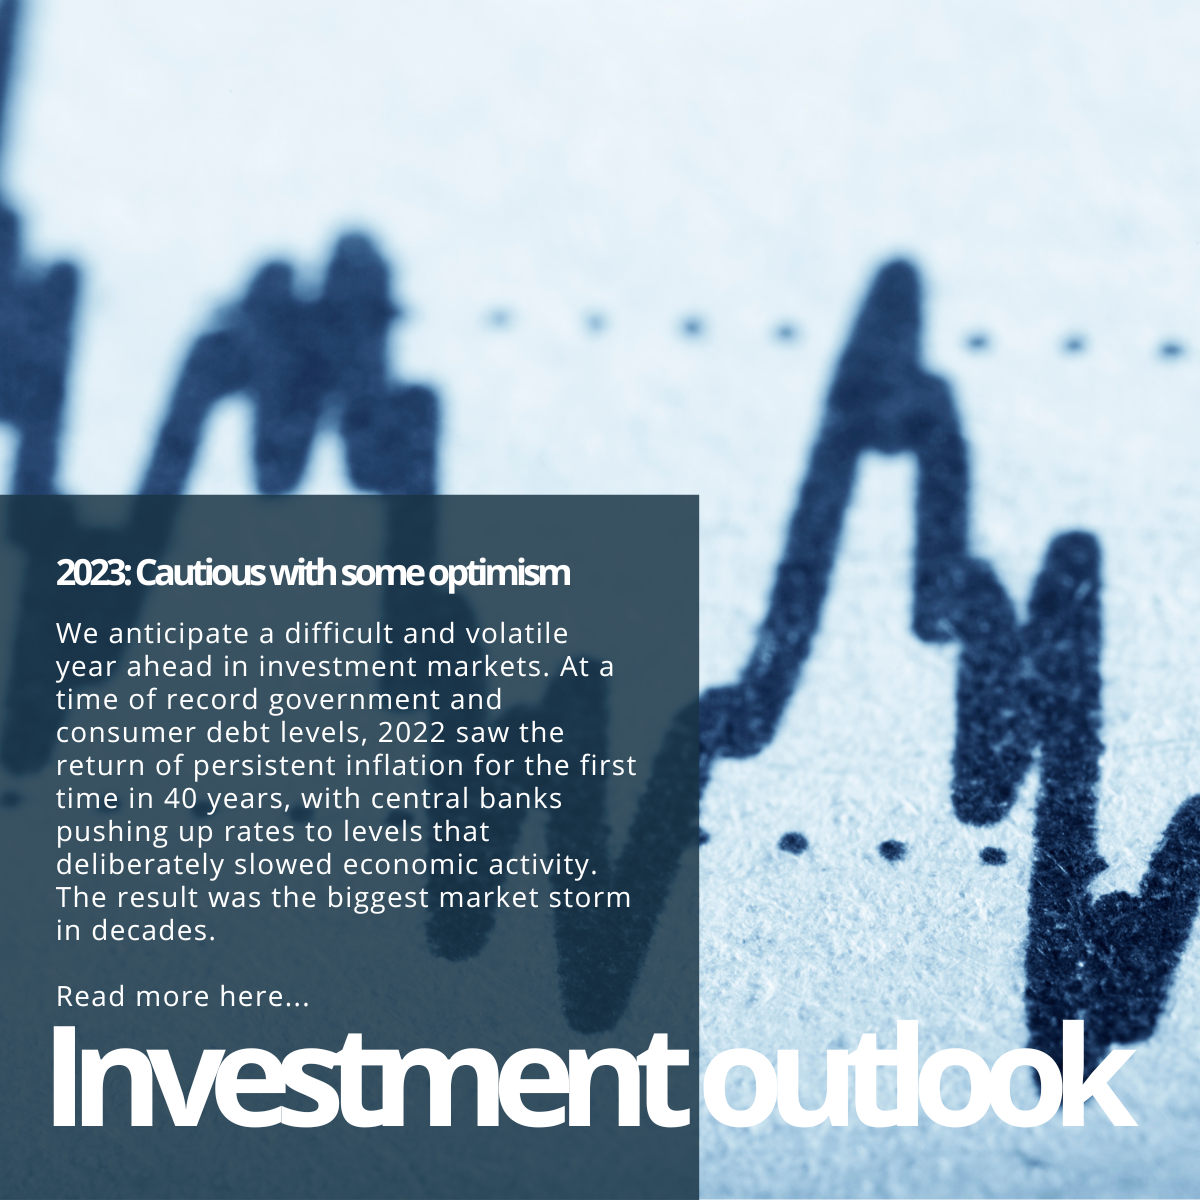 Investment outlook for 2023: Cautious with some optimism